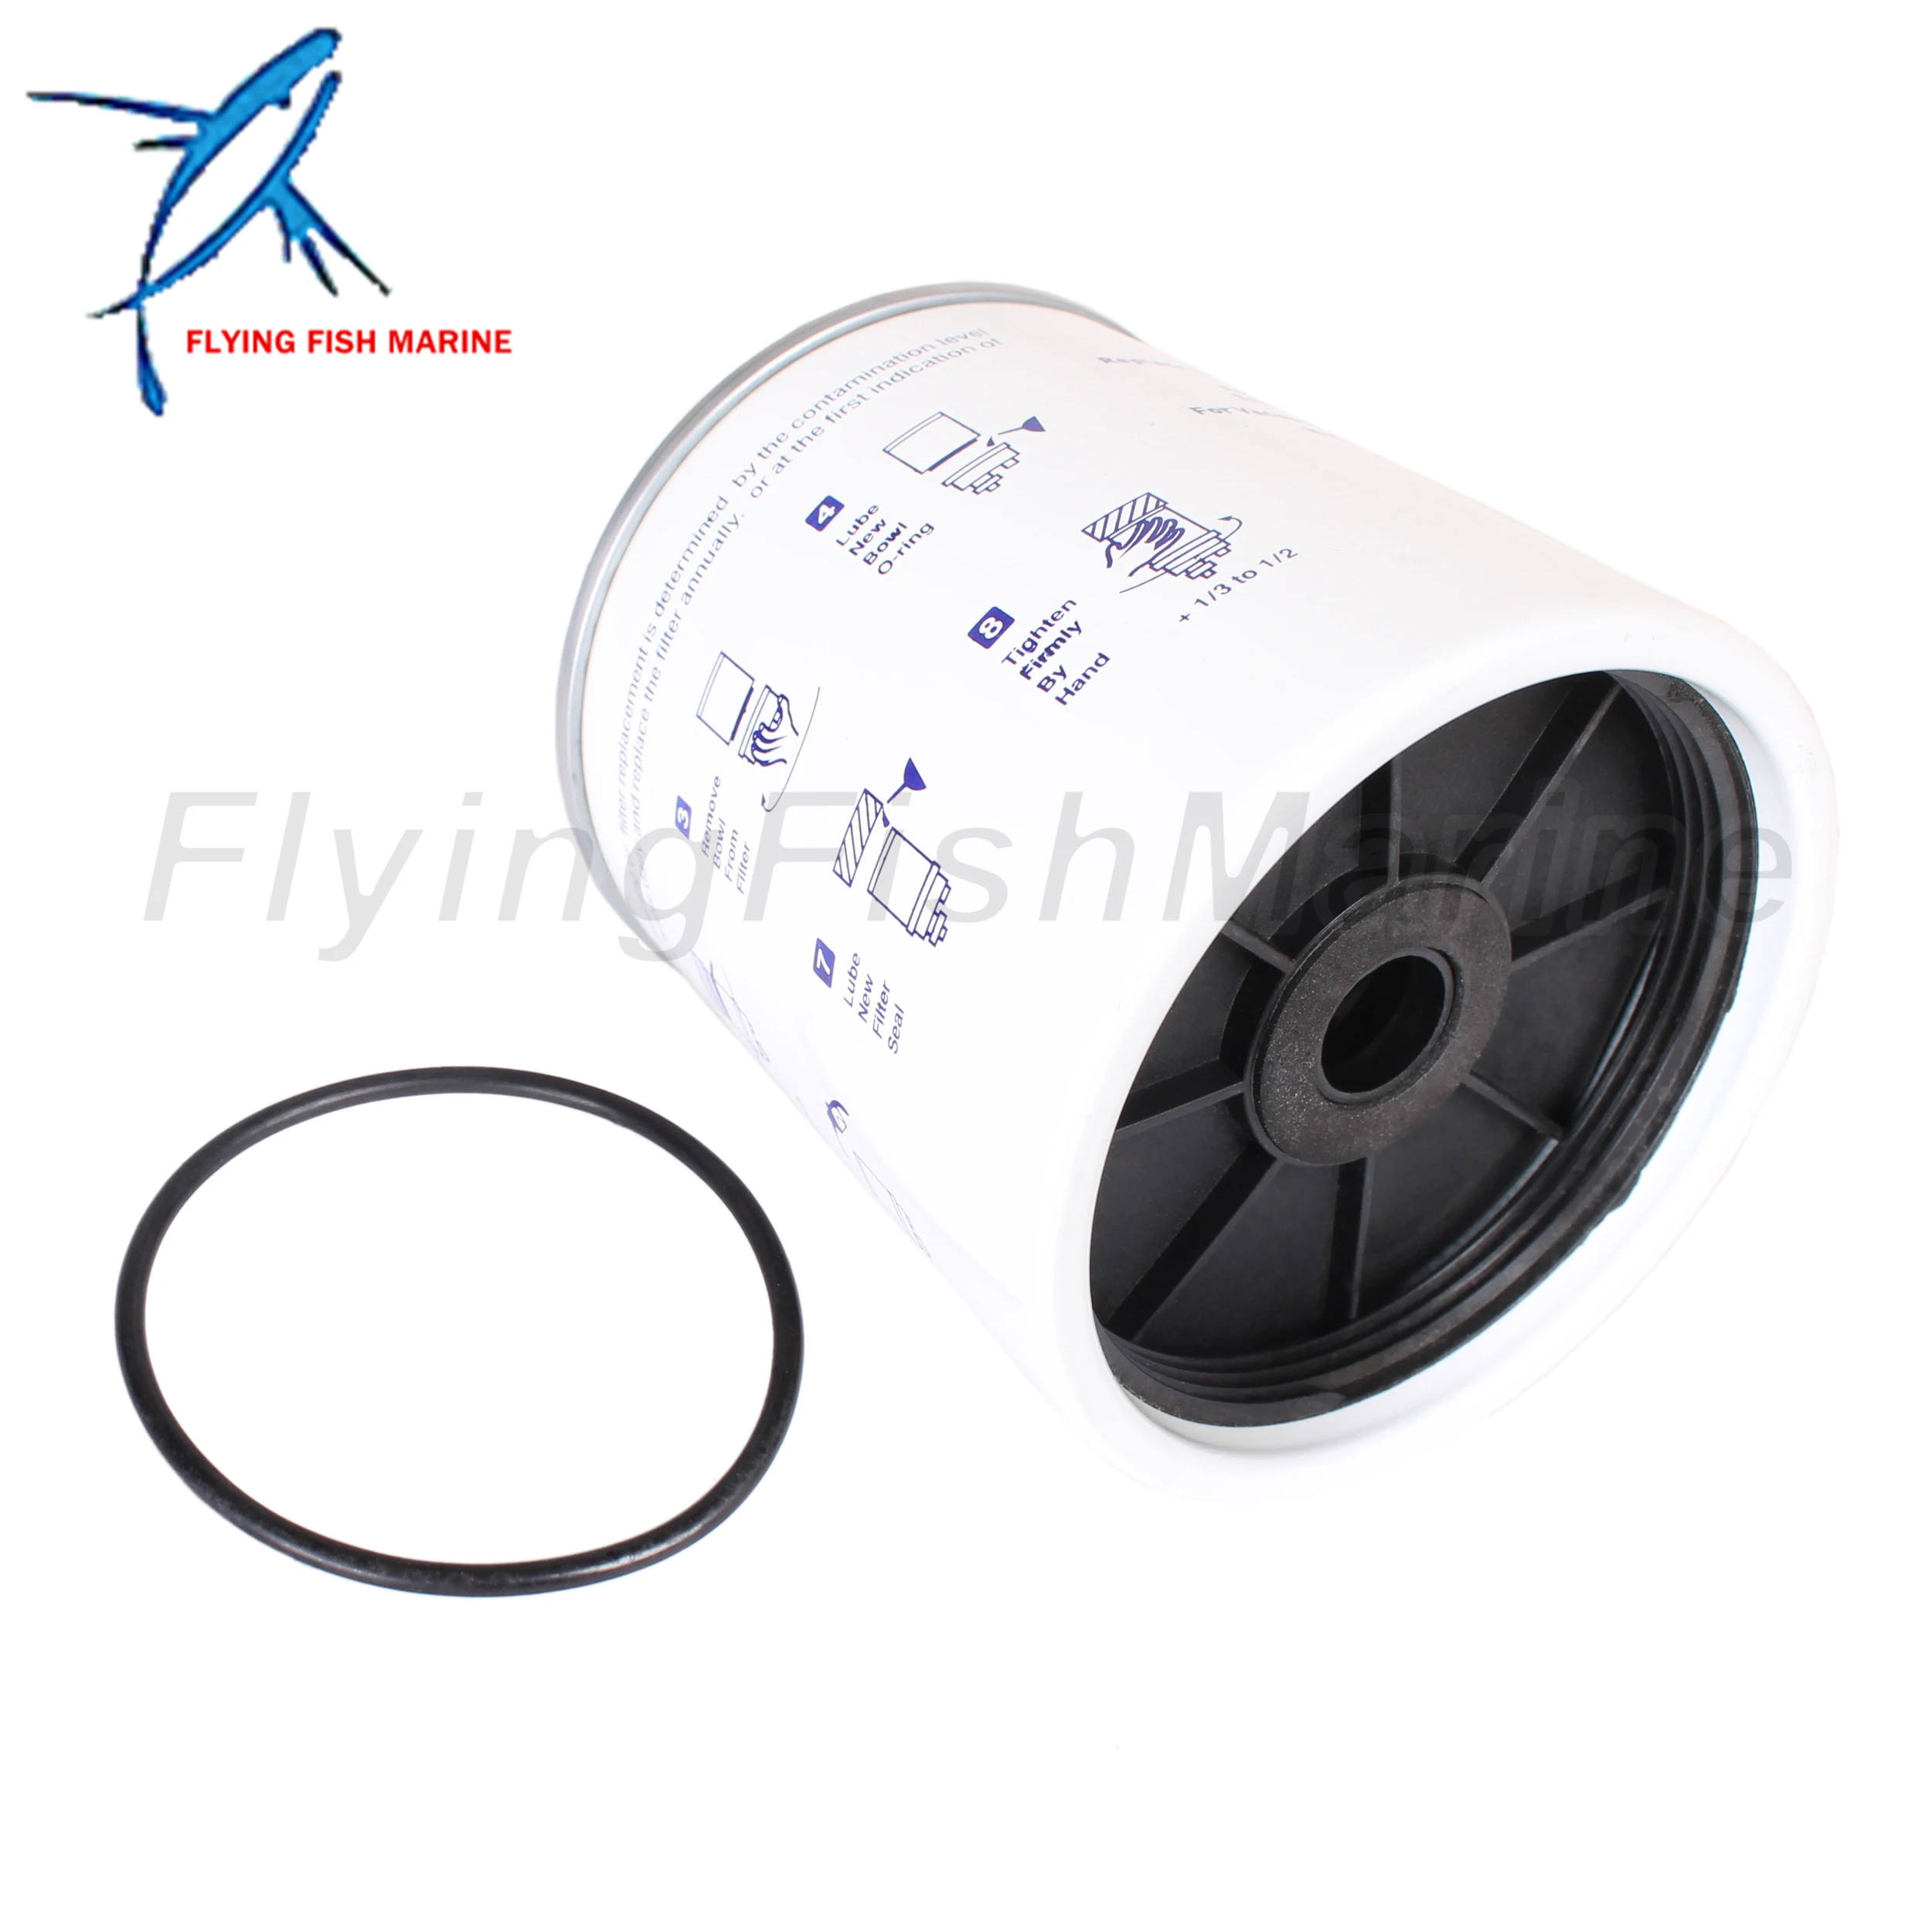 

S3227 9-37882 320R-RAC-01 490R-RAC-01 18-7922 Element for Fuel Filter Water Separator 8M0154764 8M0146206 35-886638 for Mercury